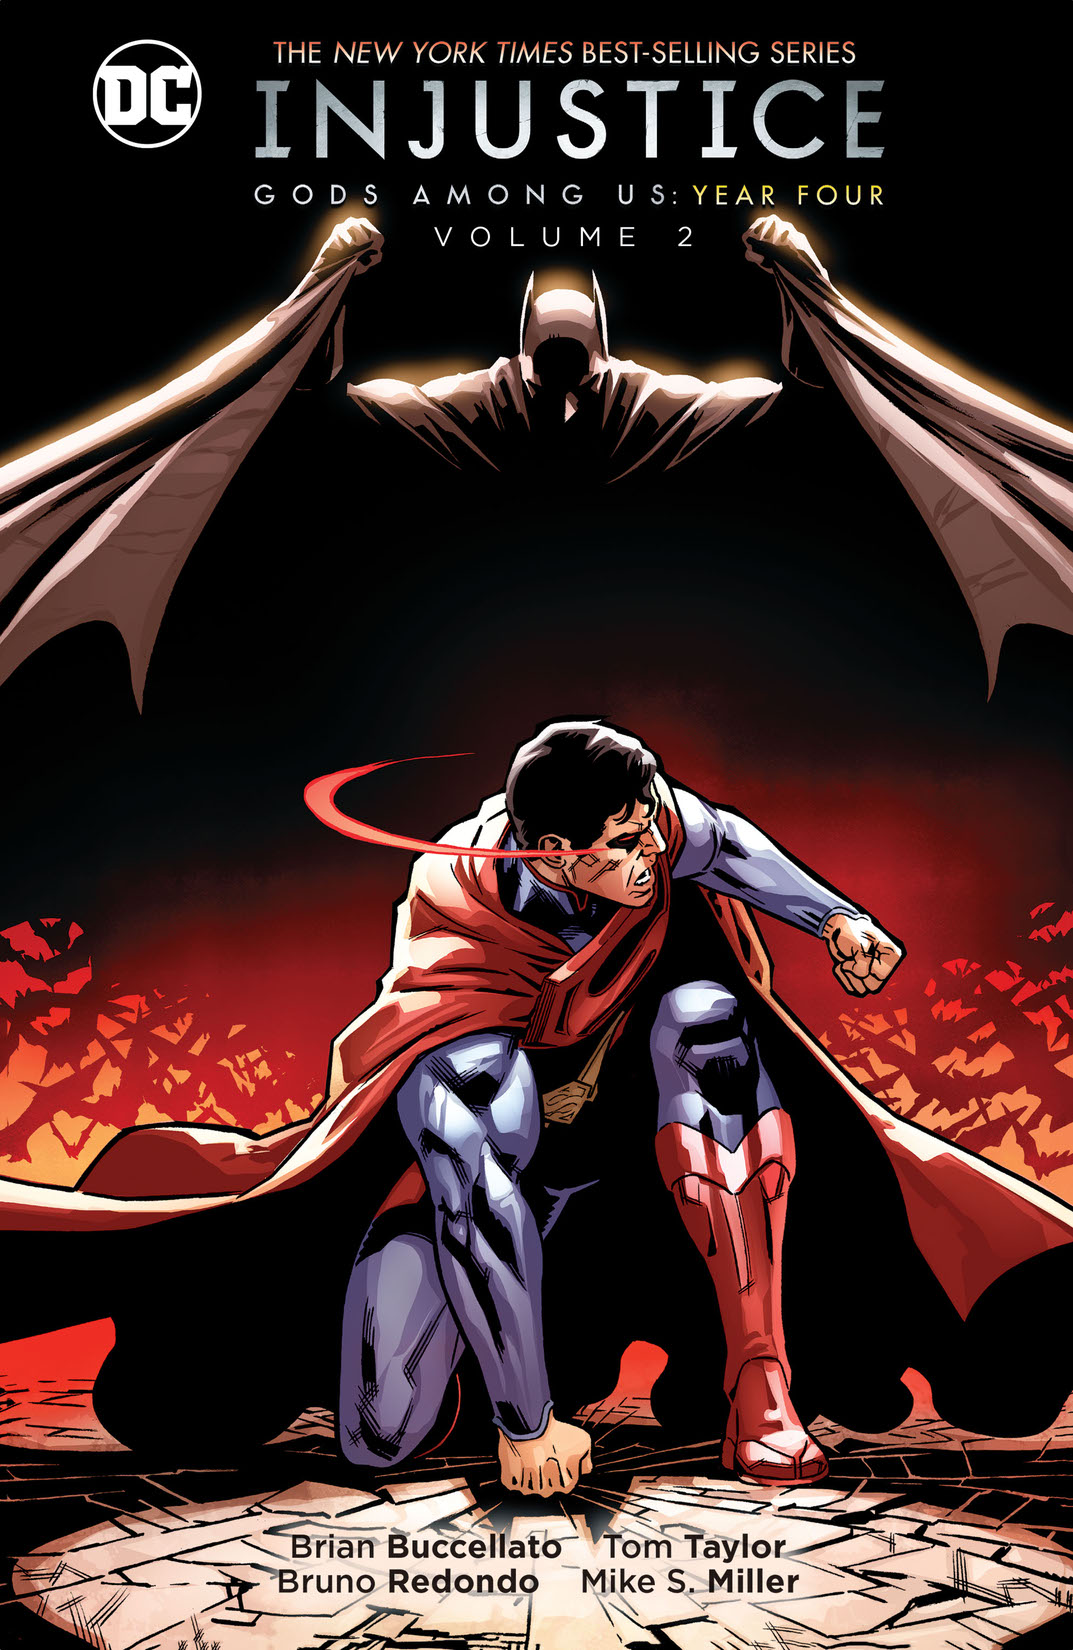 Injustice Gods Among Us Year Four Vol. 2 preview images